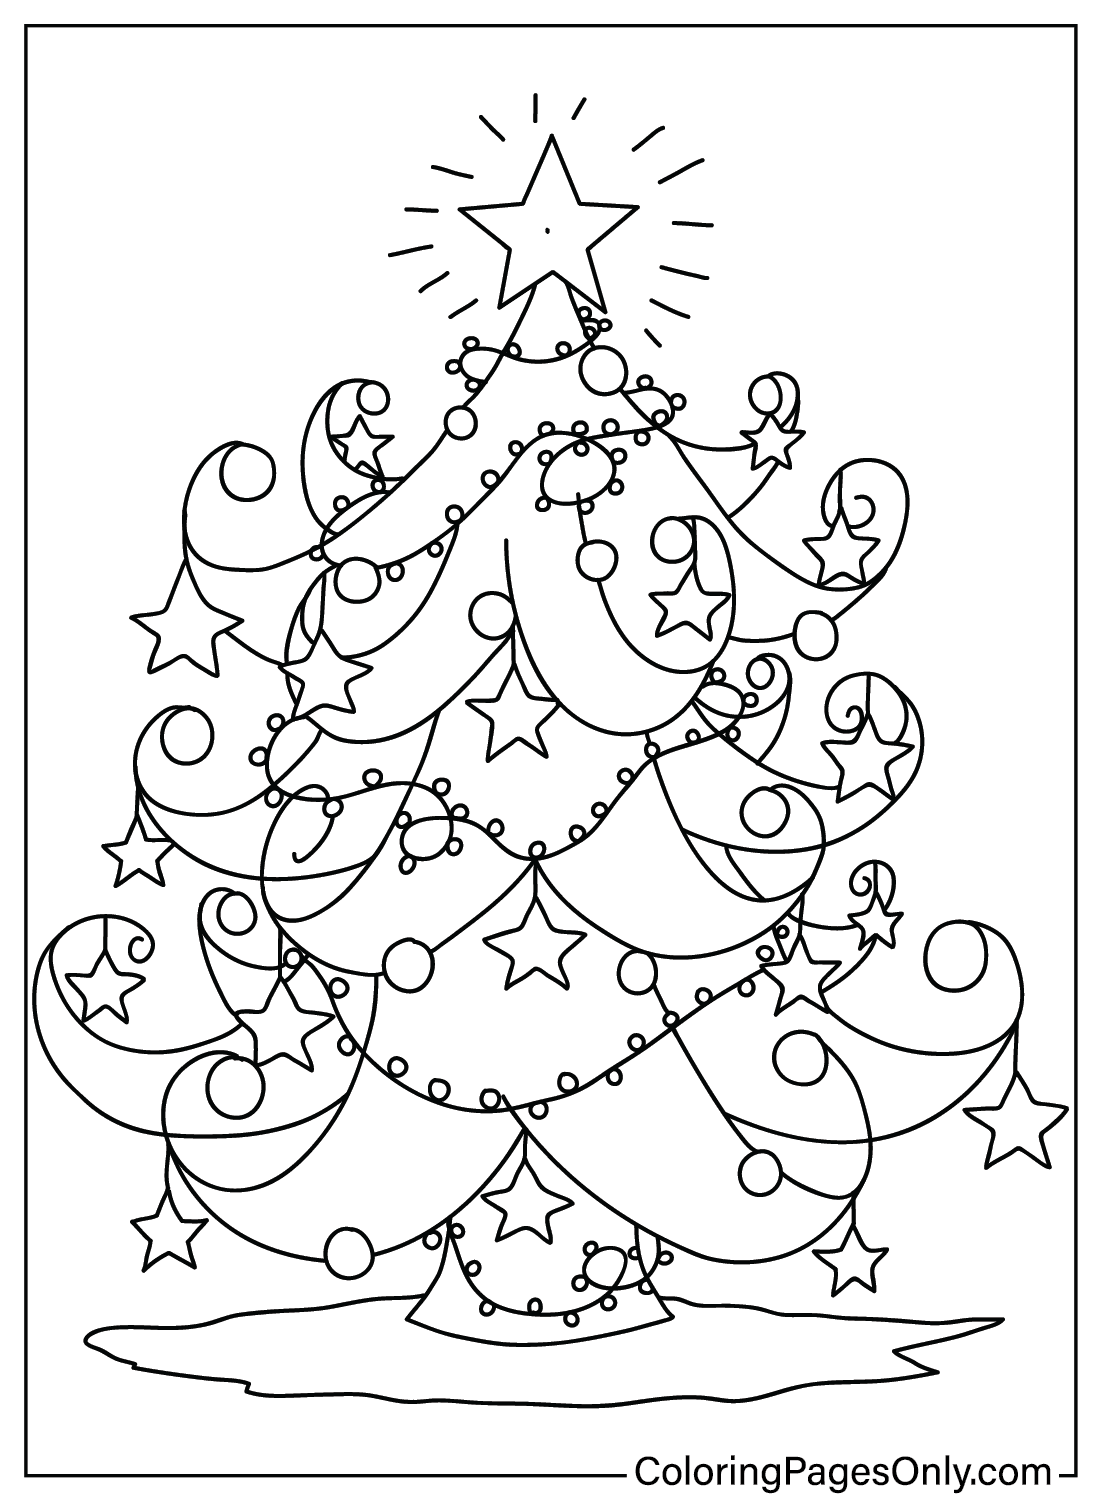 Coloring Page of Christmas Tree